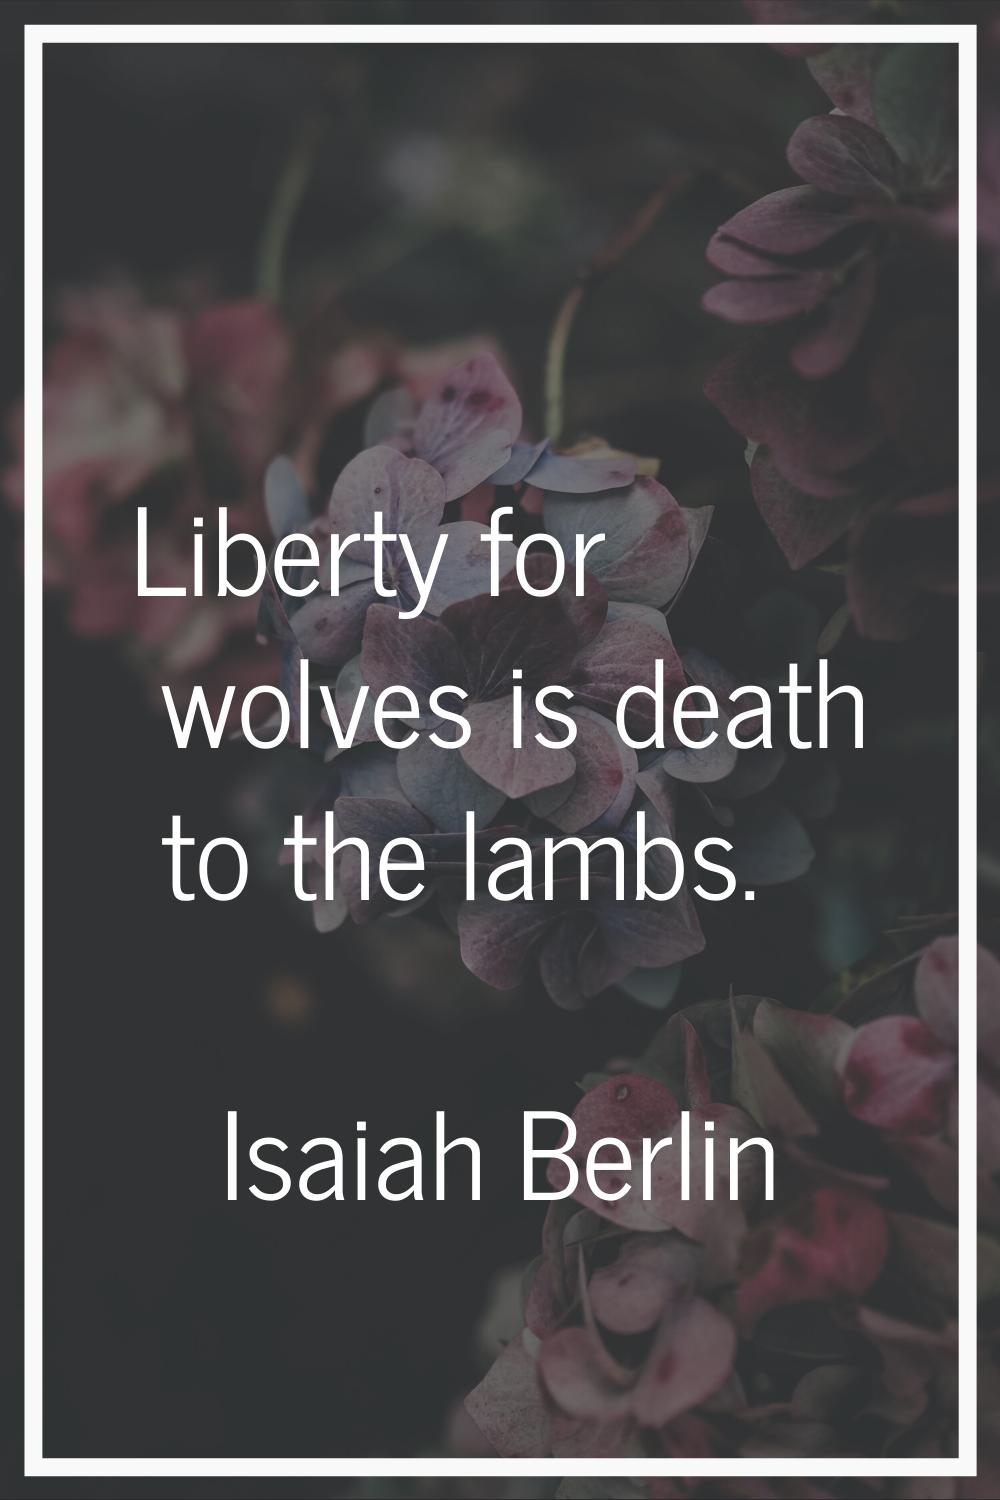 Liberty for wolves is death to the lambs.